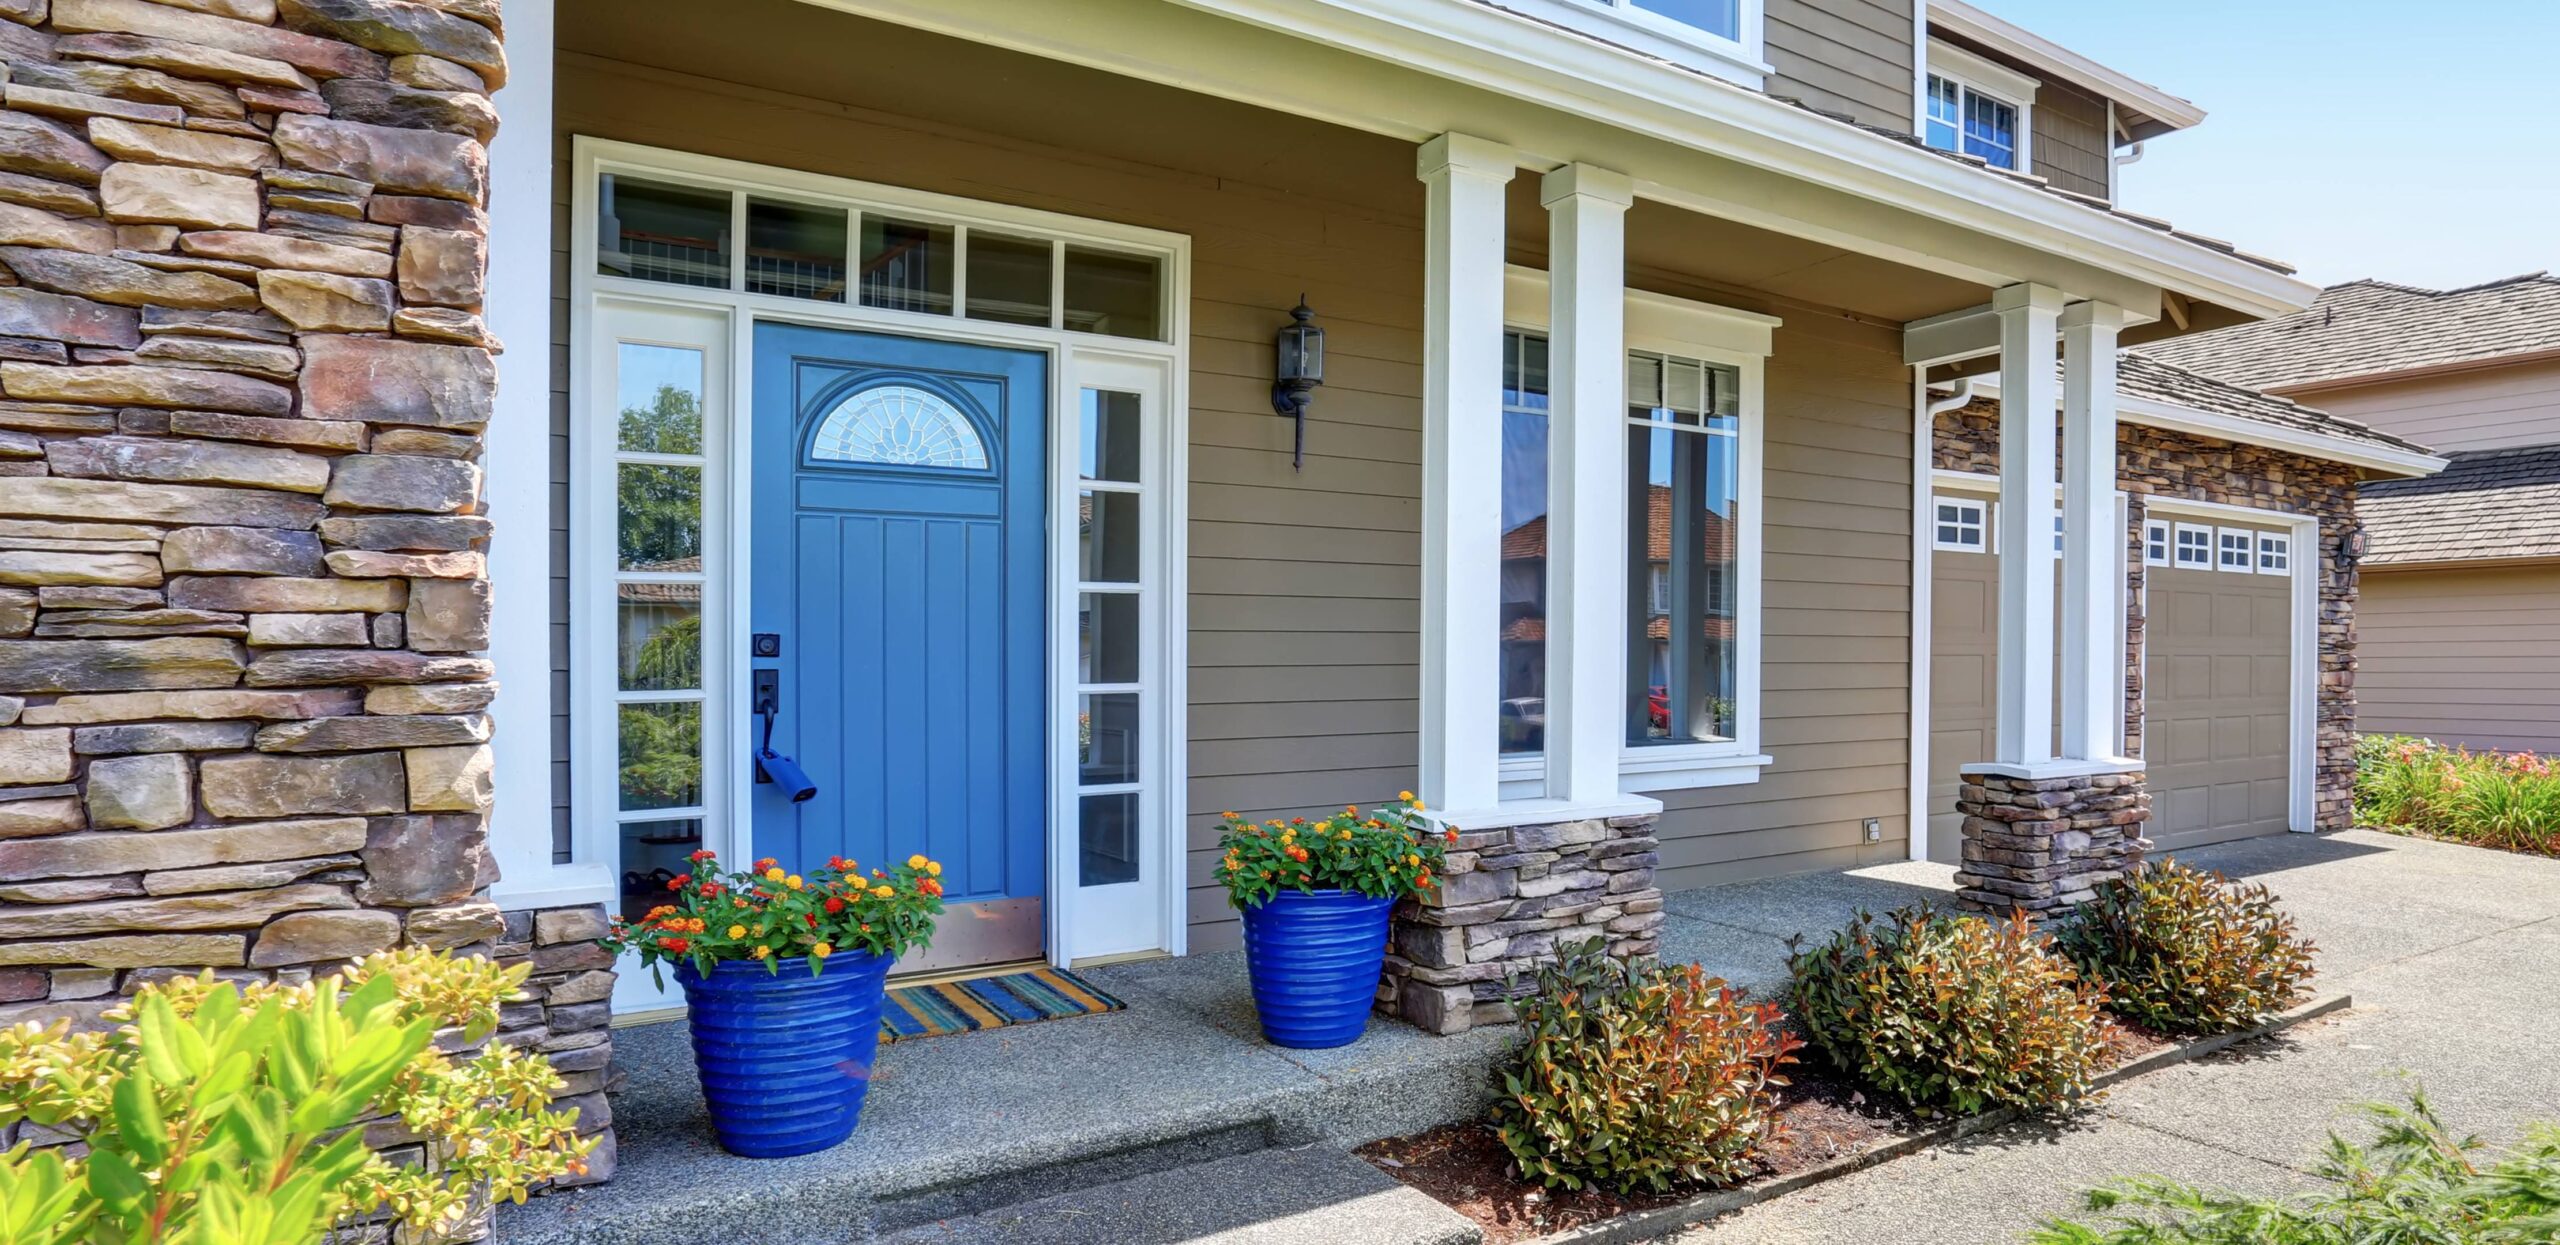 A welcoming entrance to a high end home with a bright blue door